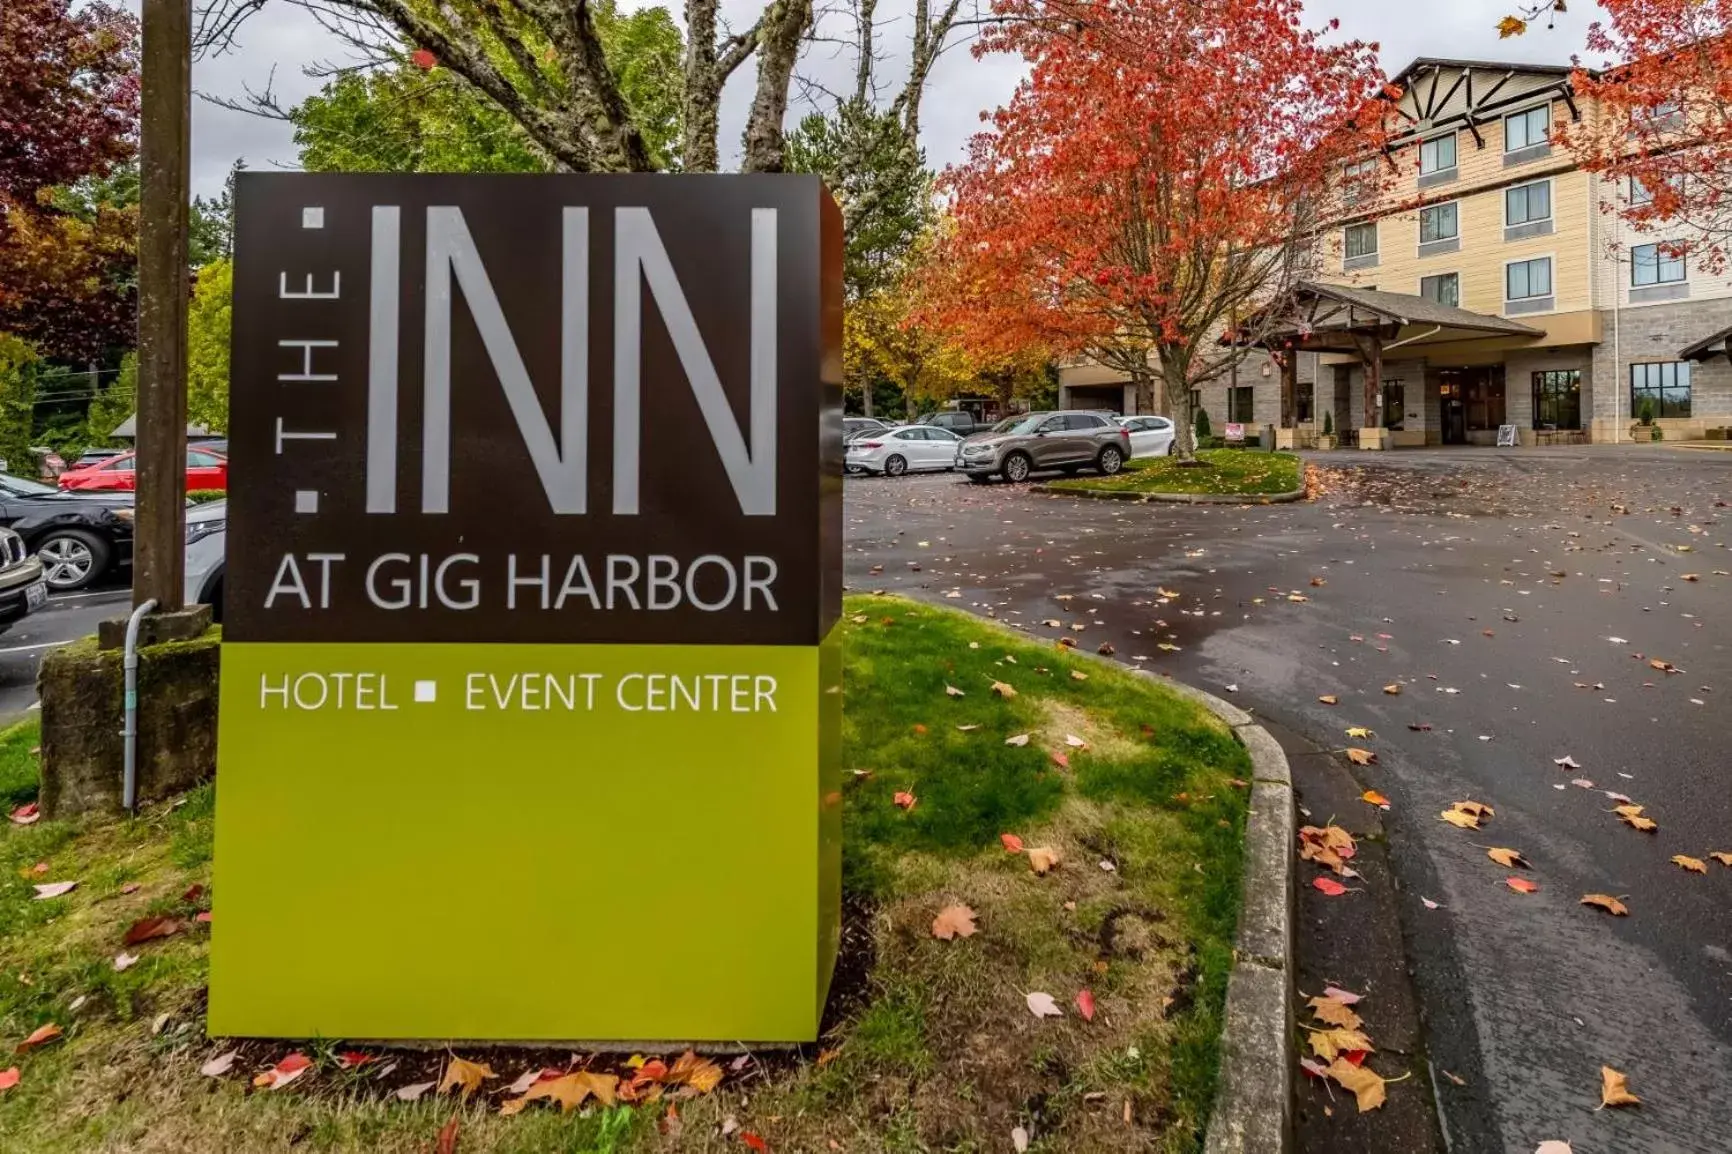 Property building in The INN at Gig Harbor